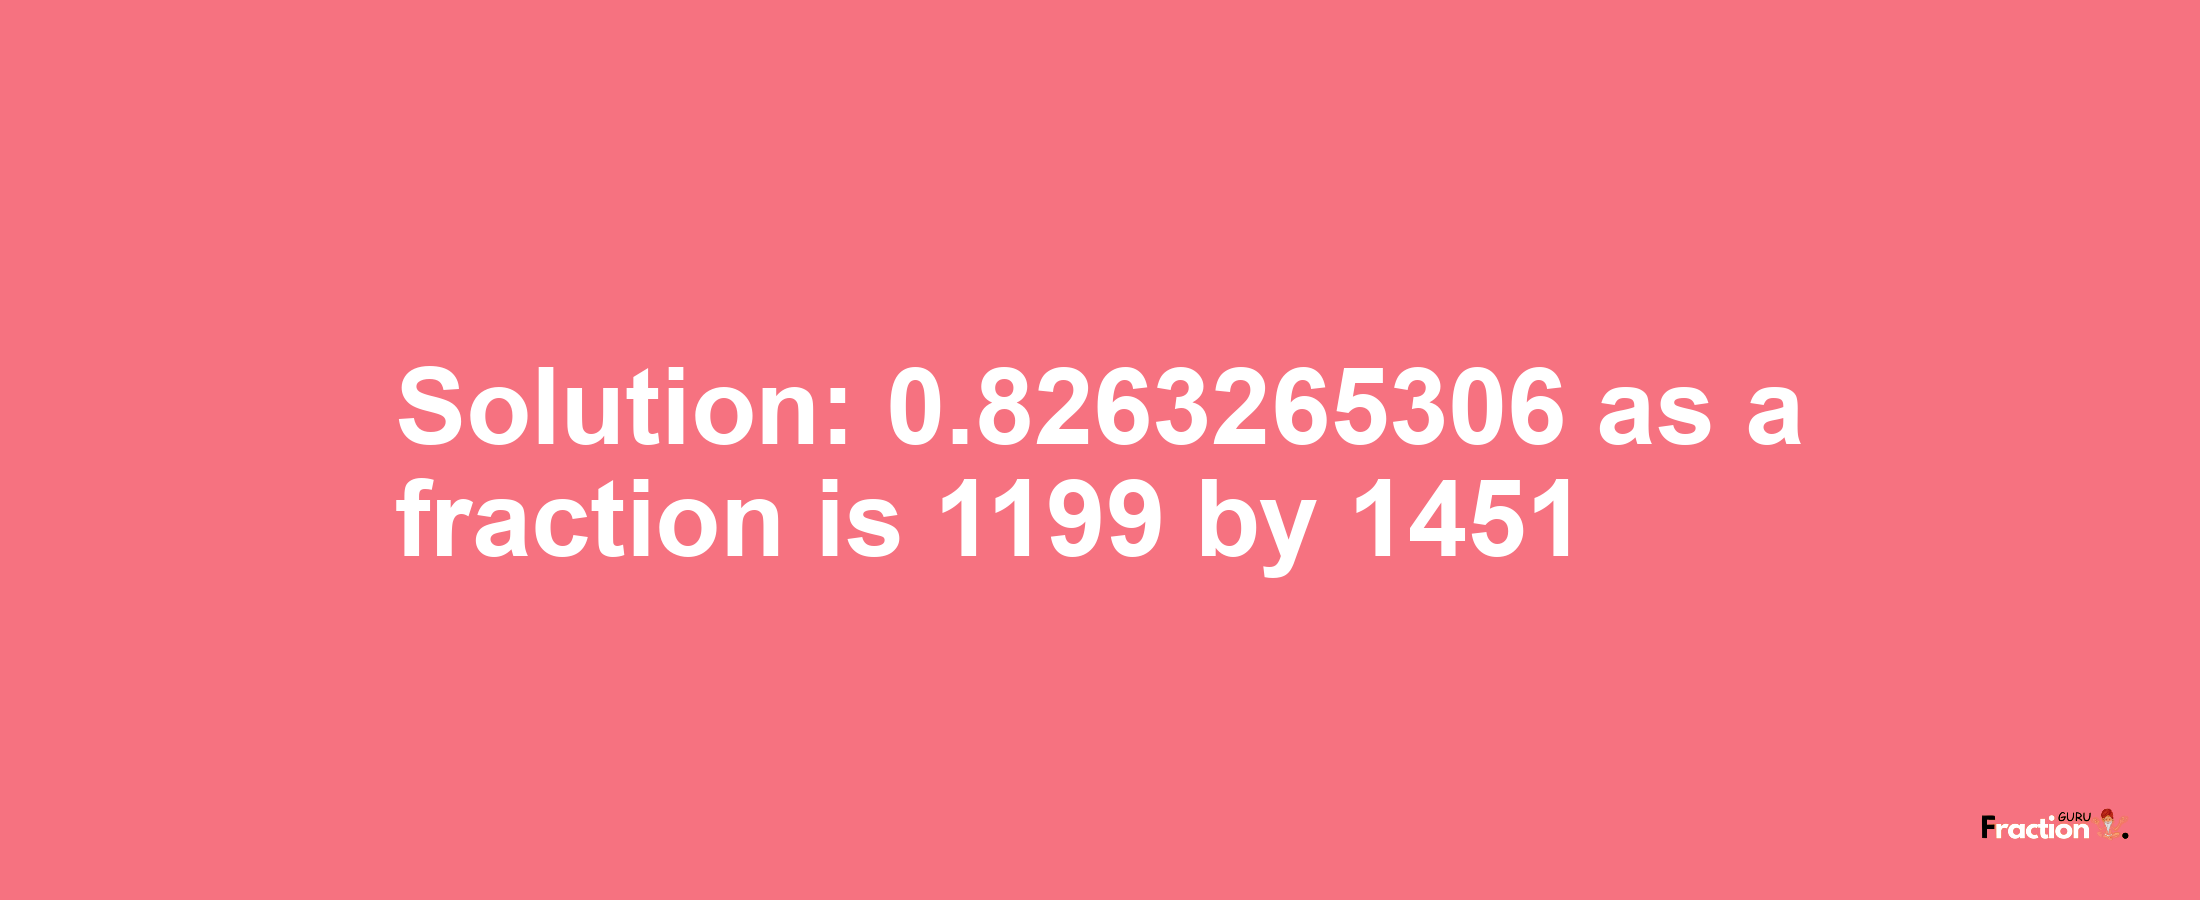 Solution:0.8263265306 as a fraction is 1199/1451